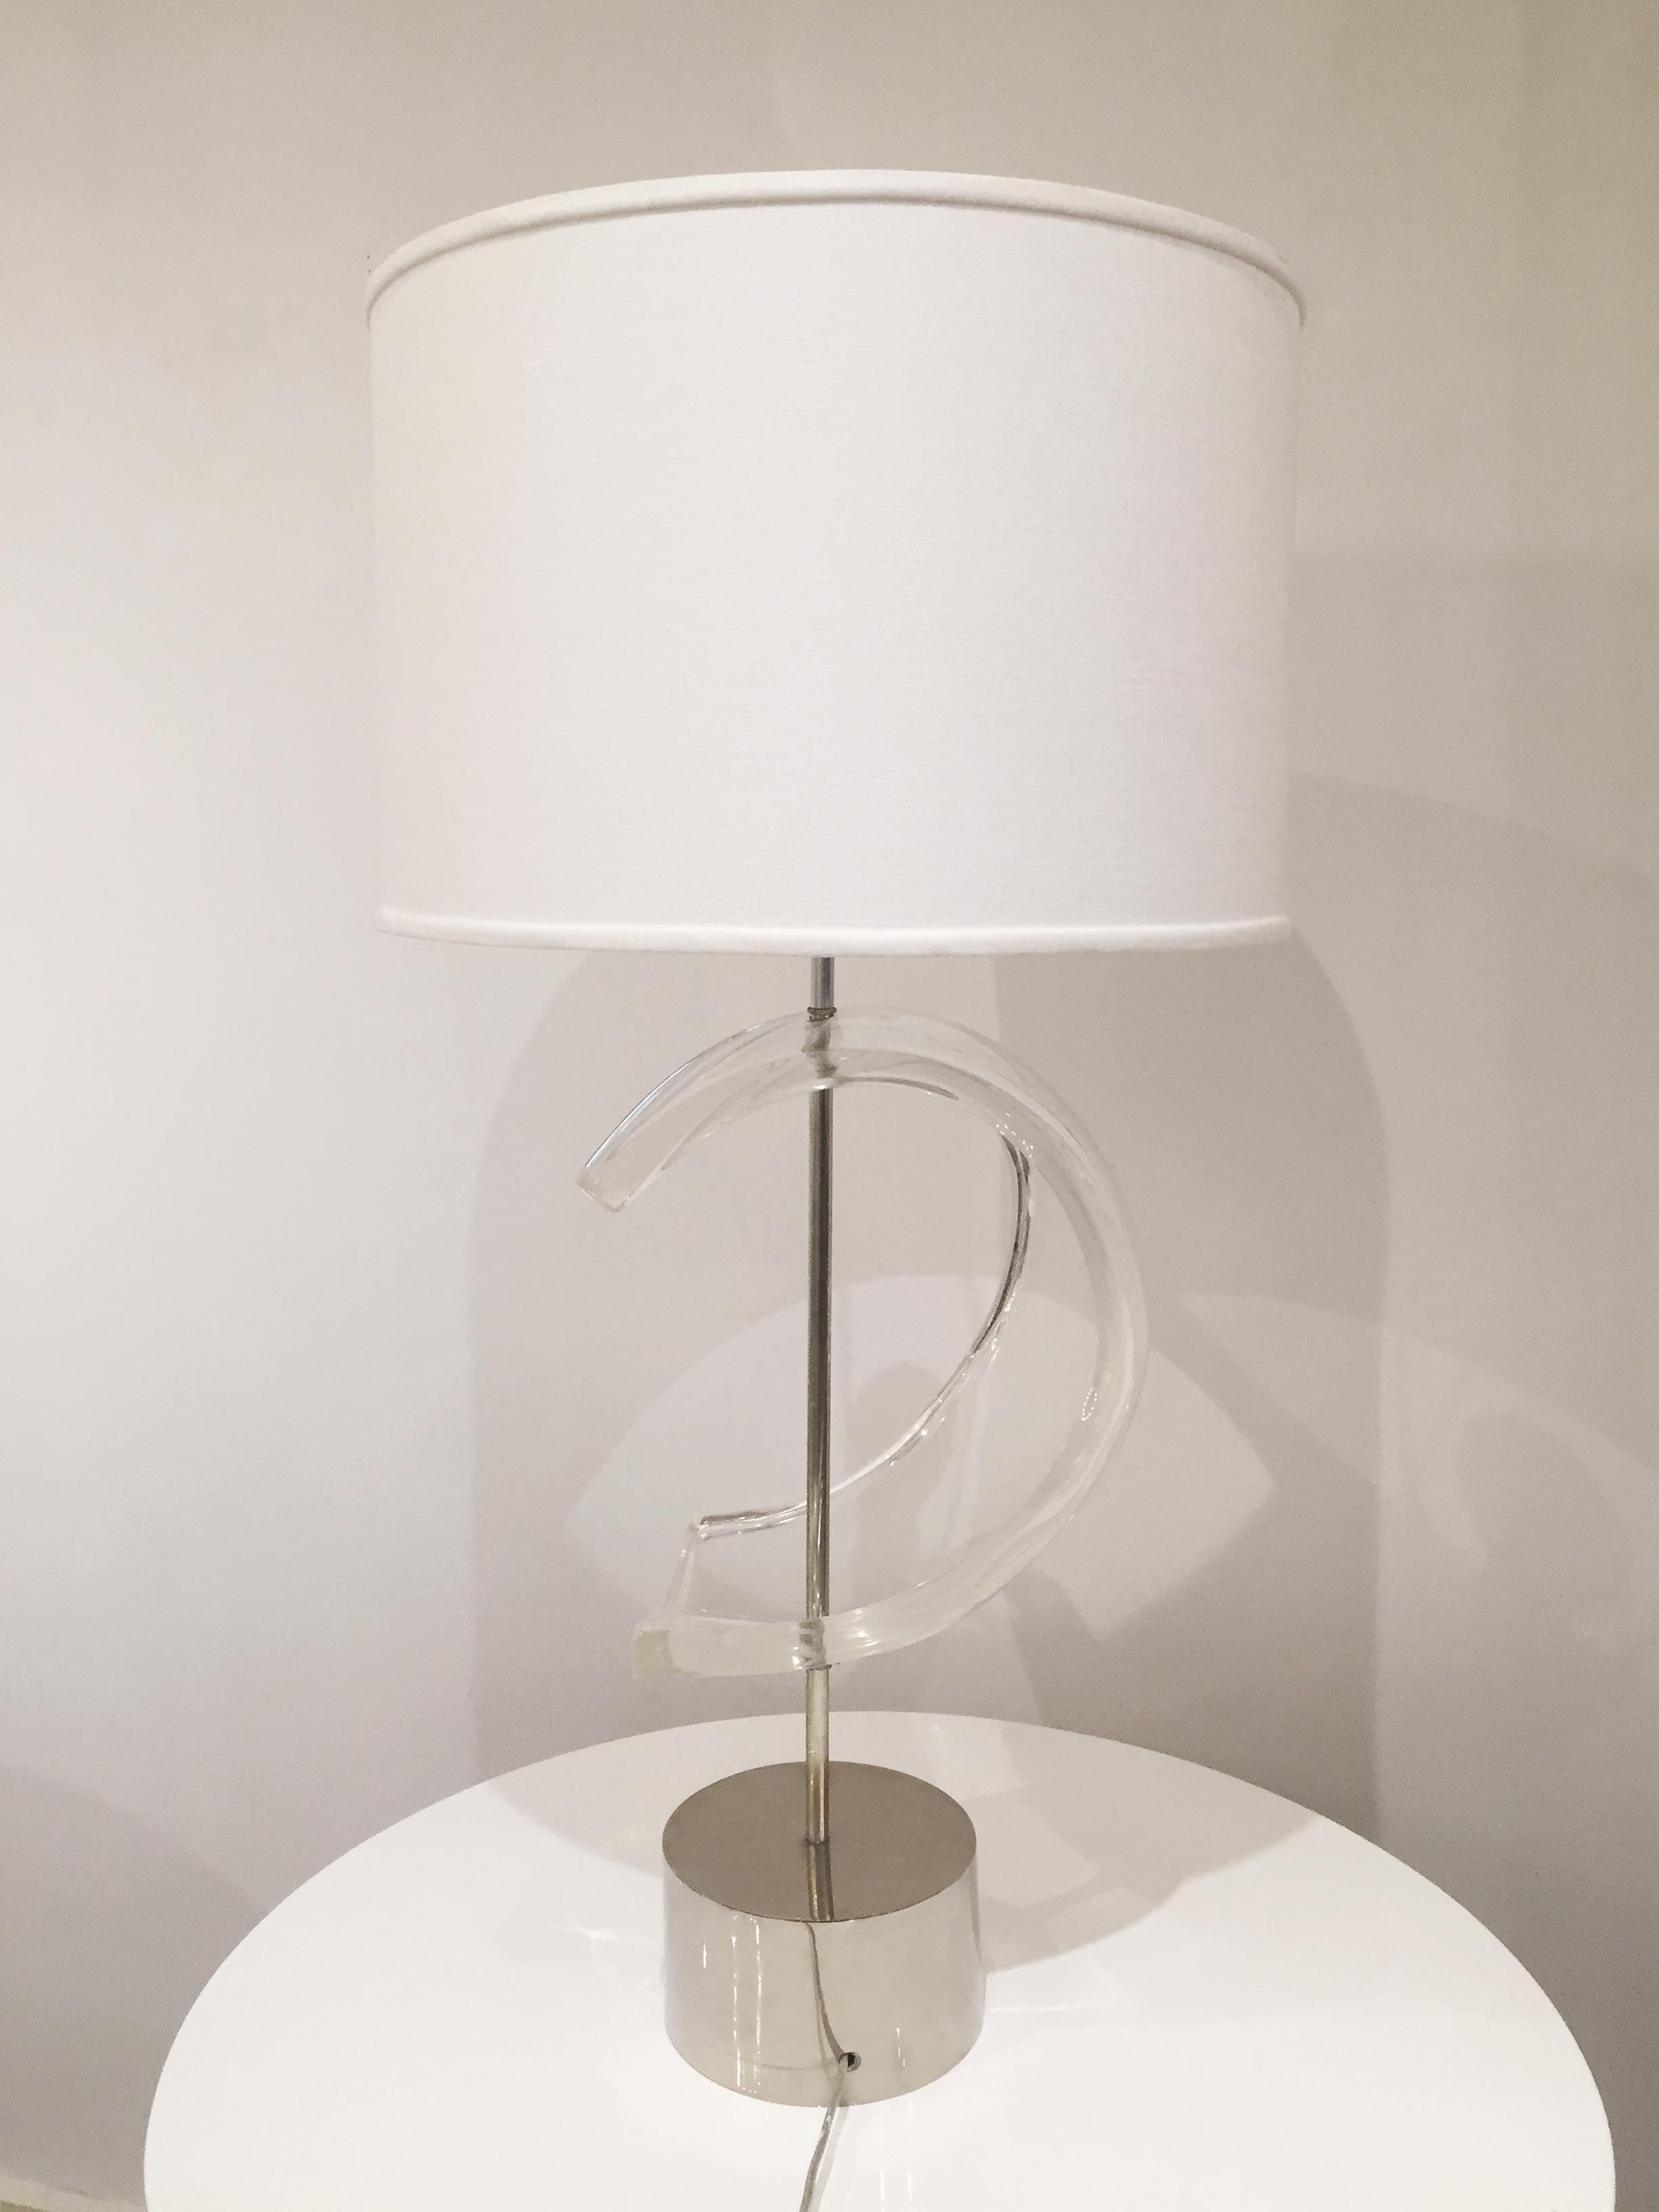 This table lamp is an exciting accent from the 1970s. The cylindrical chrome base supports a chrome rod which 